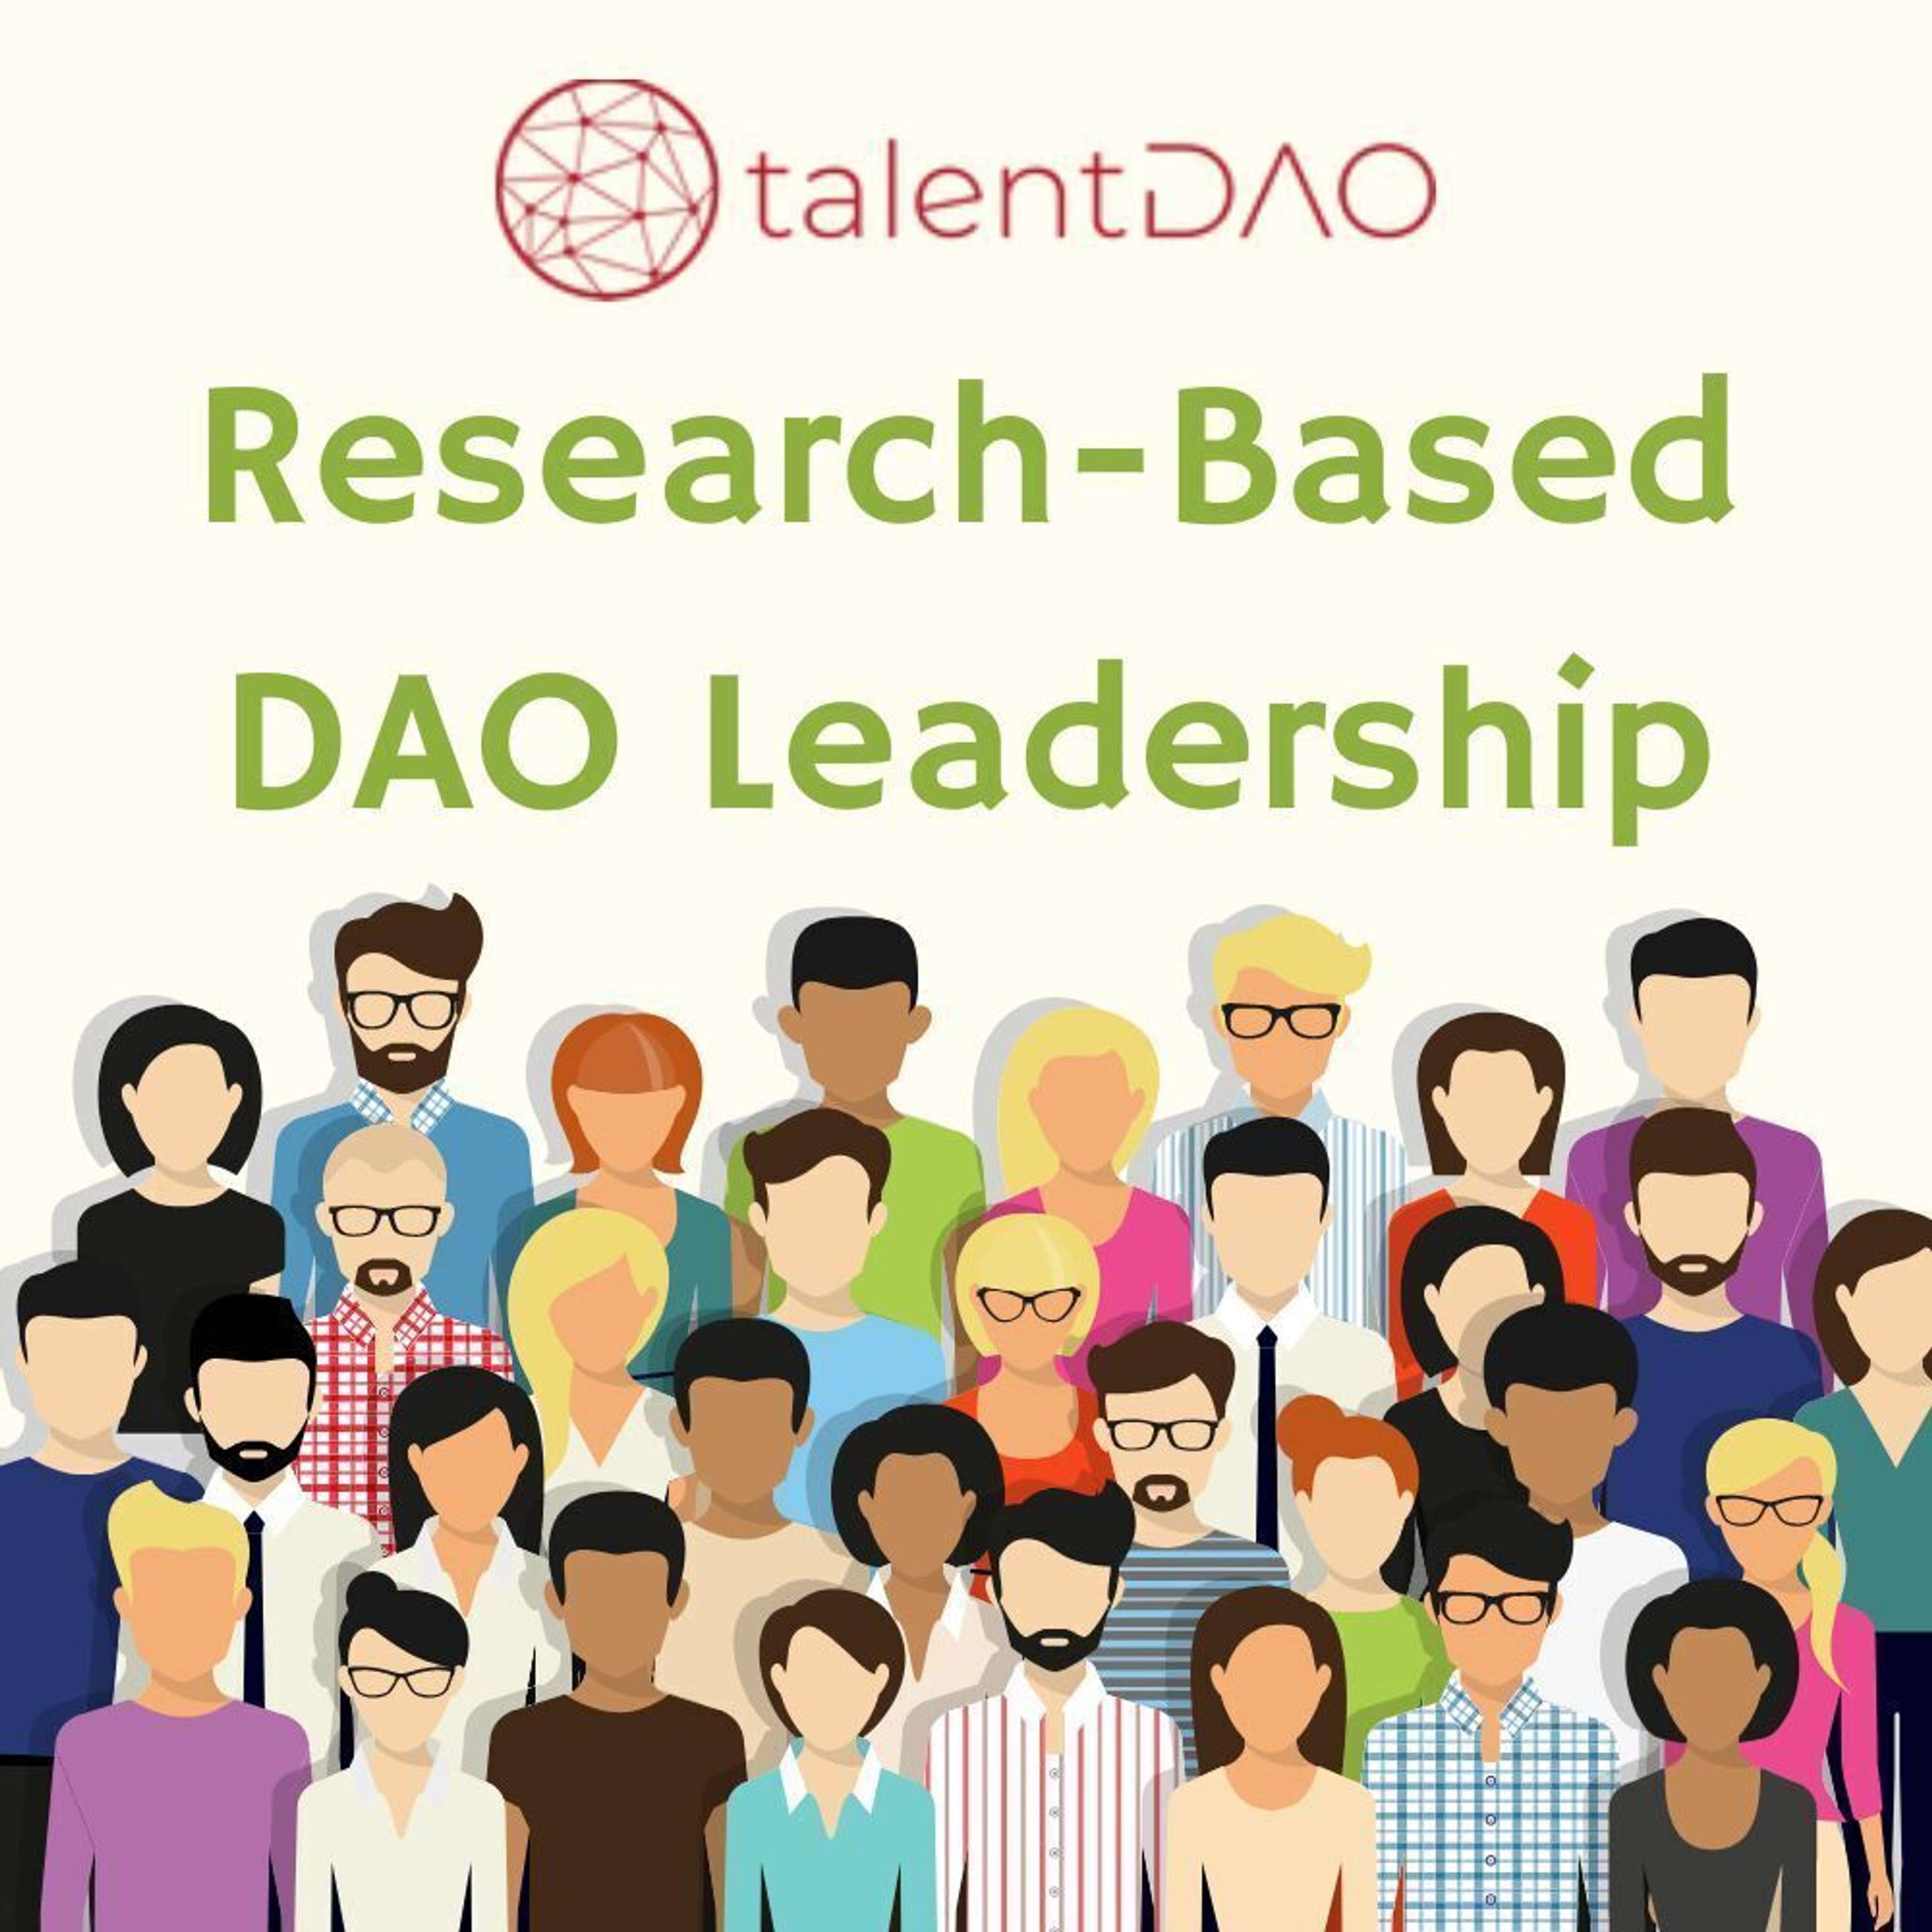 talentDAO: Research-Based DAO Management